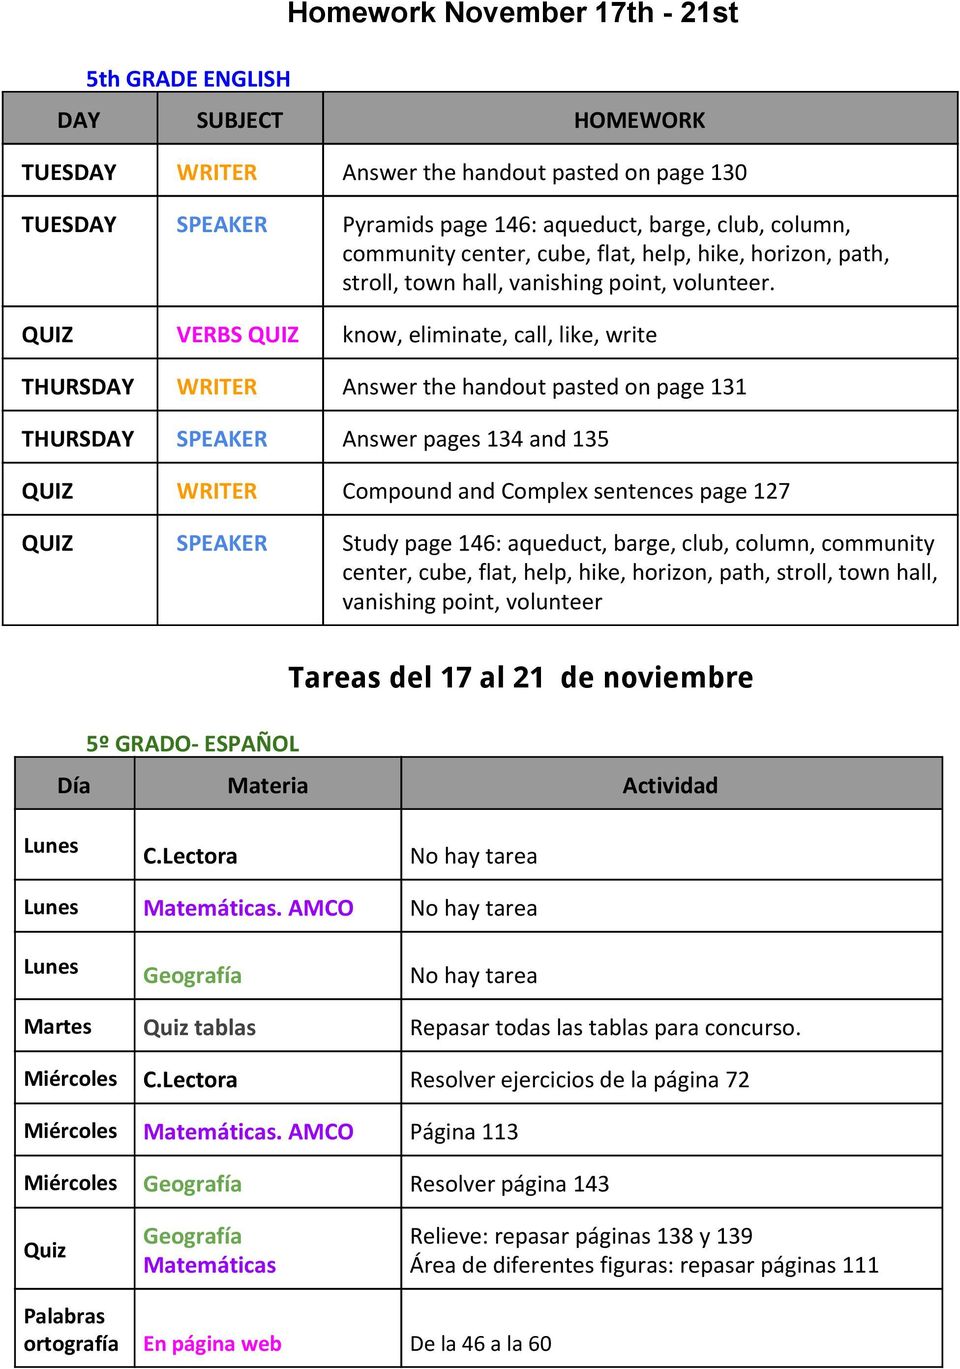 QUIZ VERBS QUIZ know, eliminate, call, like, write THURSDAY WRITER Answer the handout pasted on page 131 THURSDAY SPEAKER Answer pages 134 and 135 QUIZ WRITER Compound and Complex sentences page 127